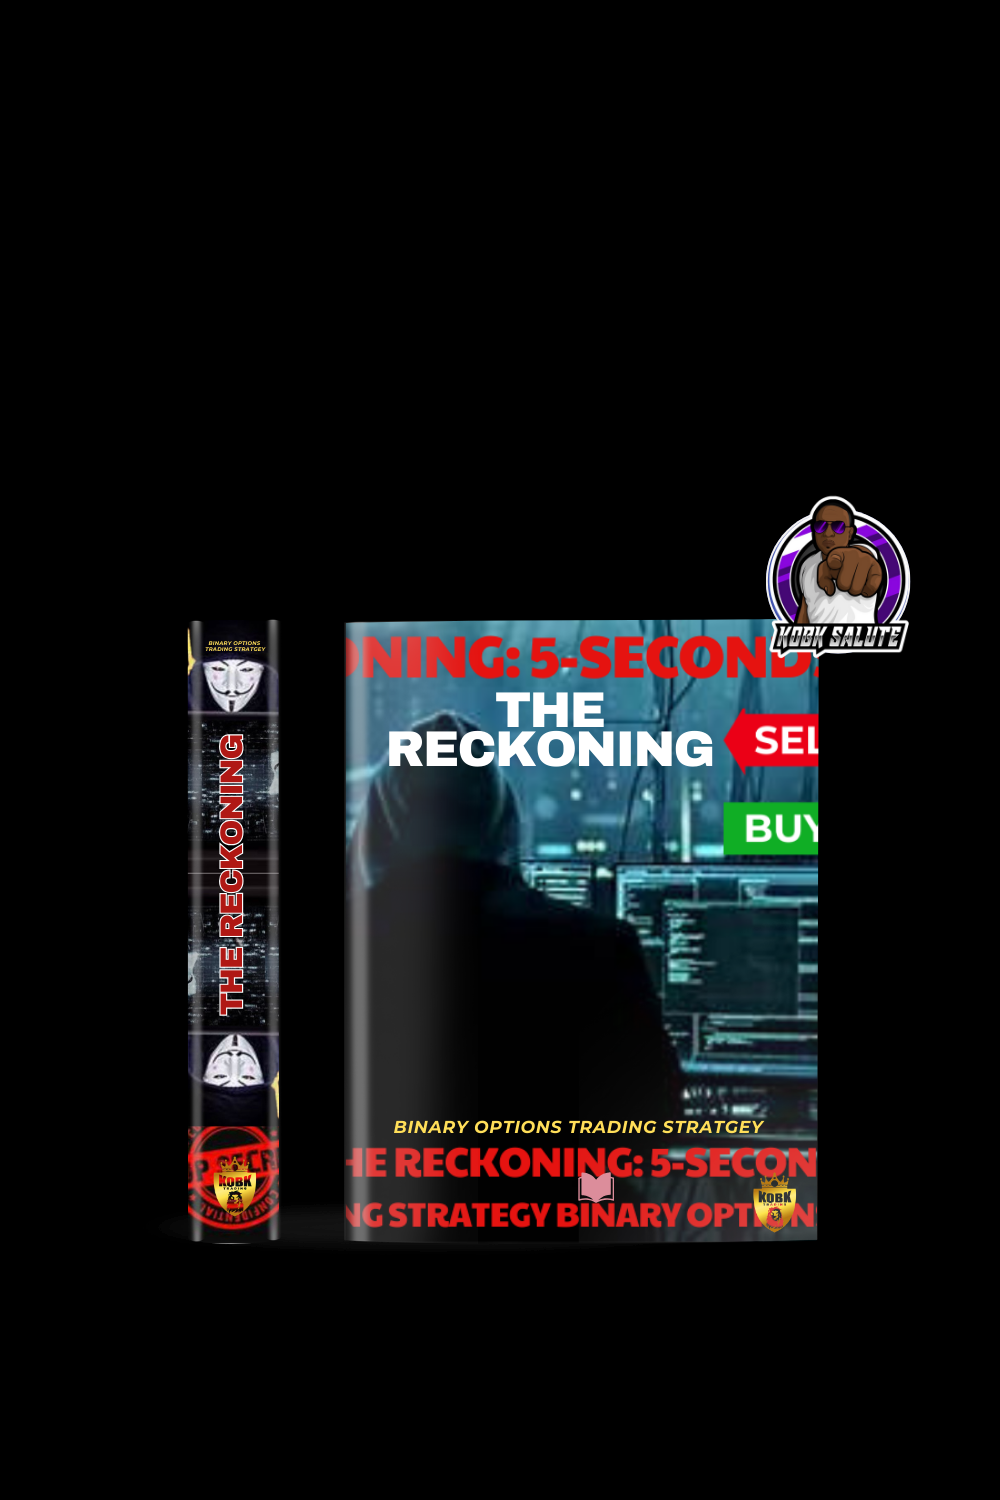 THE RECKONING: 5 SEC TRADING Binary Options - WILL BE EMAILED TO YOU!!!